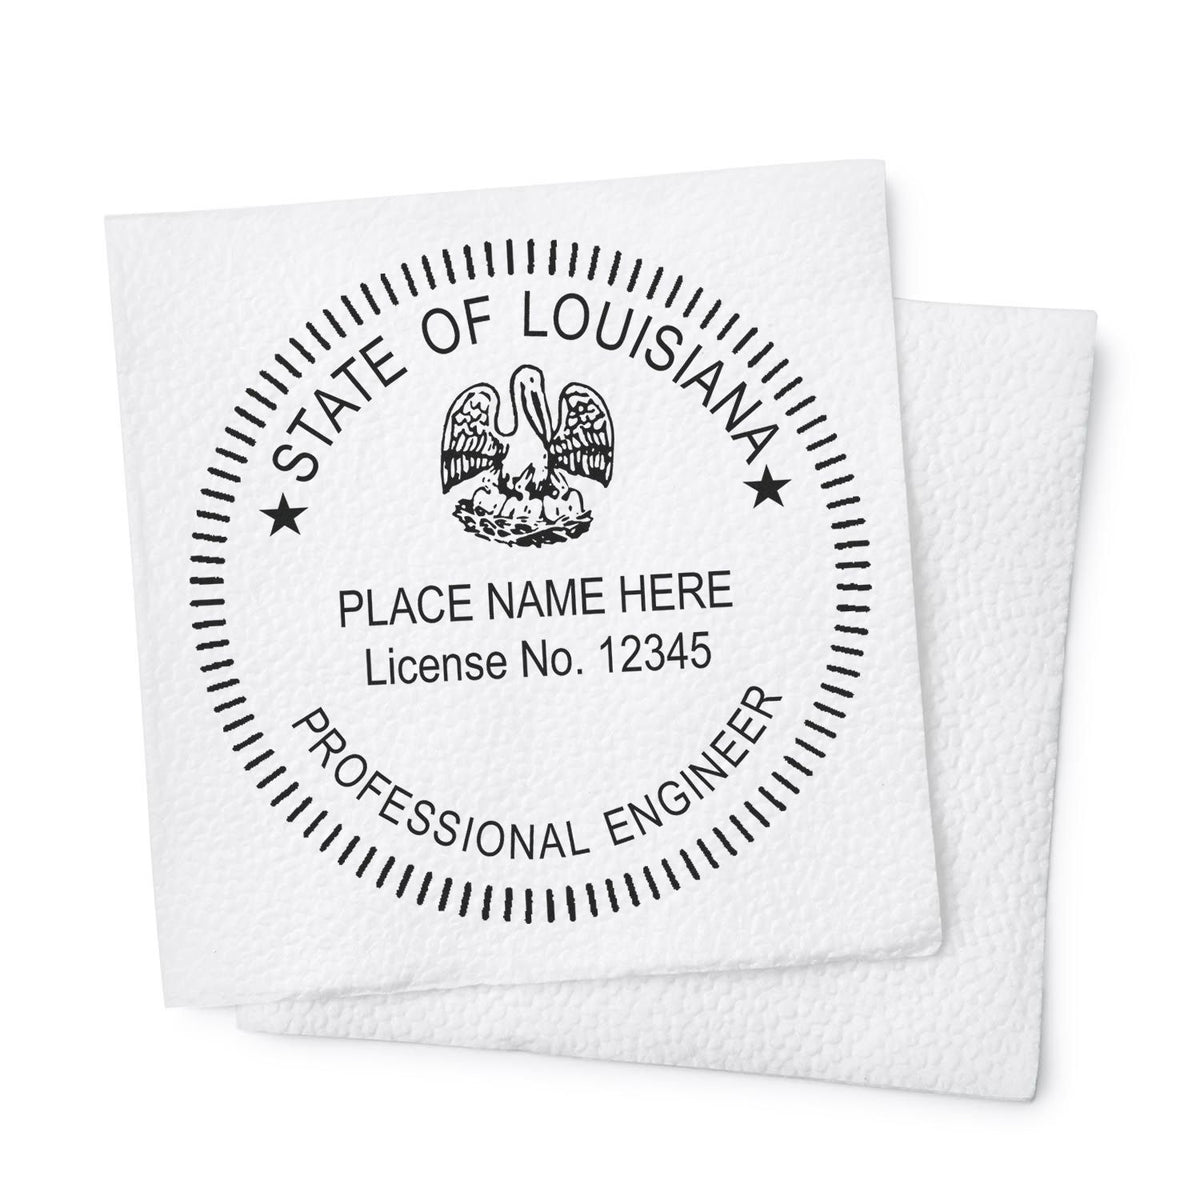 This paper is stamped with a sample imprint of the Louisiana Professional Engineer Seal Stamp, signifying its quality and reliability.